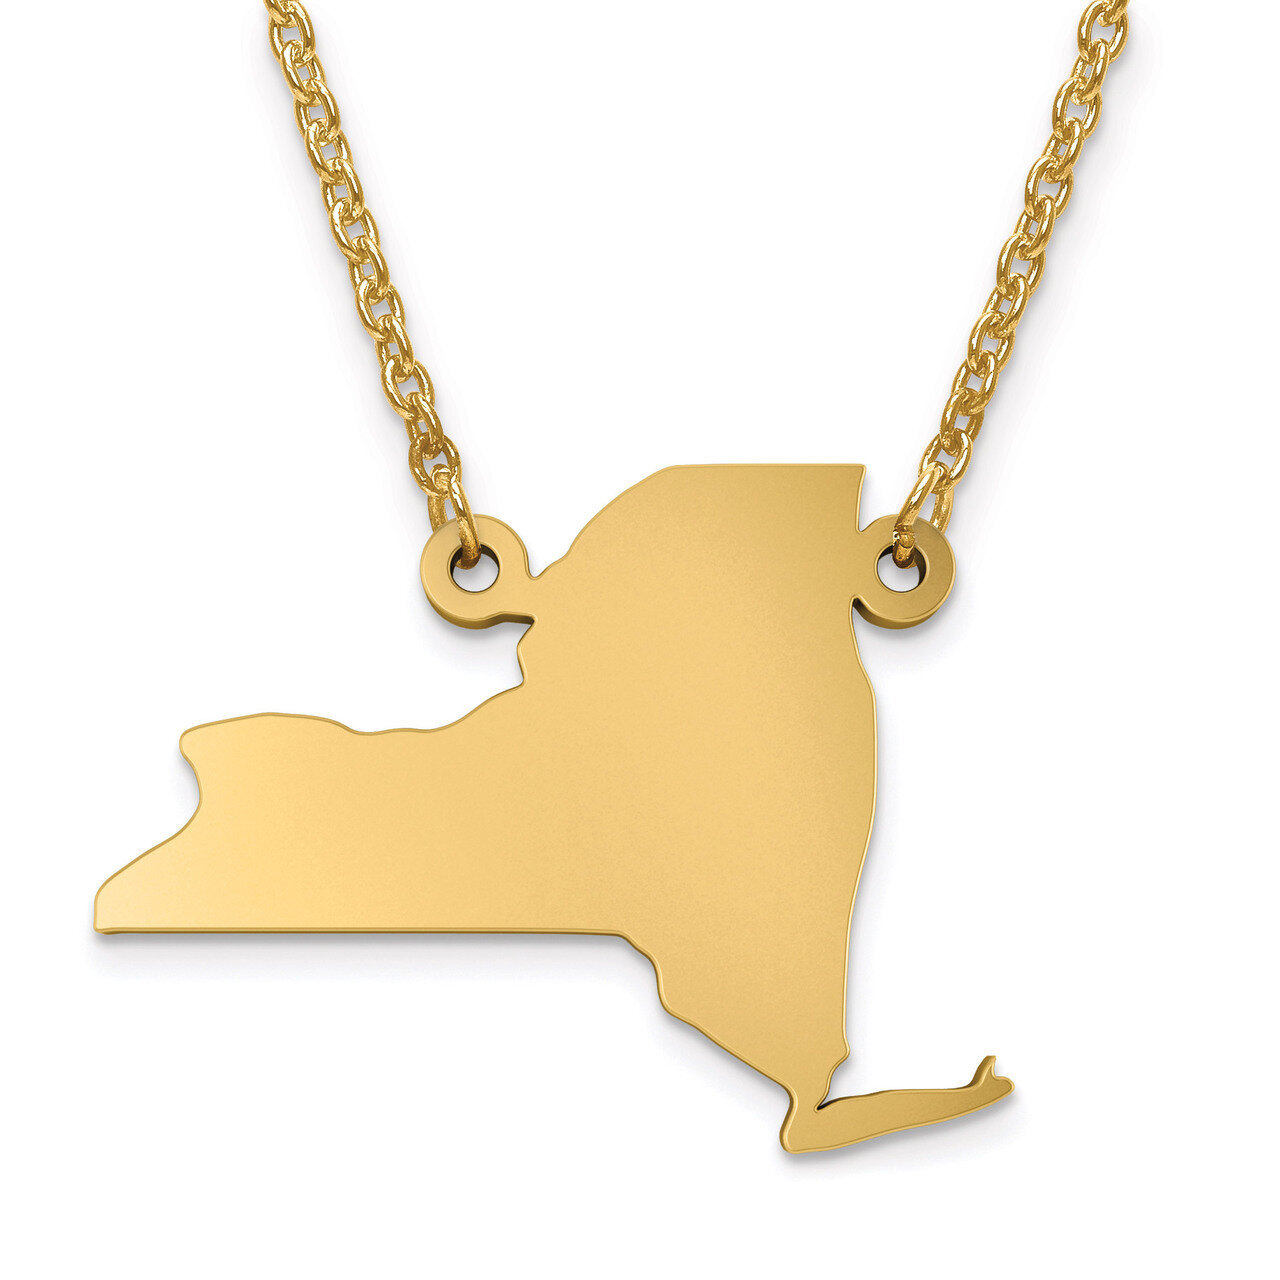 New York State Pendant with Chain Engravable Gold-plated on Sterling Silver